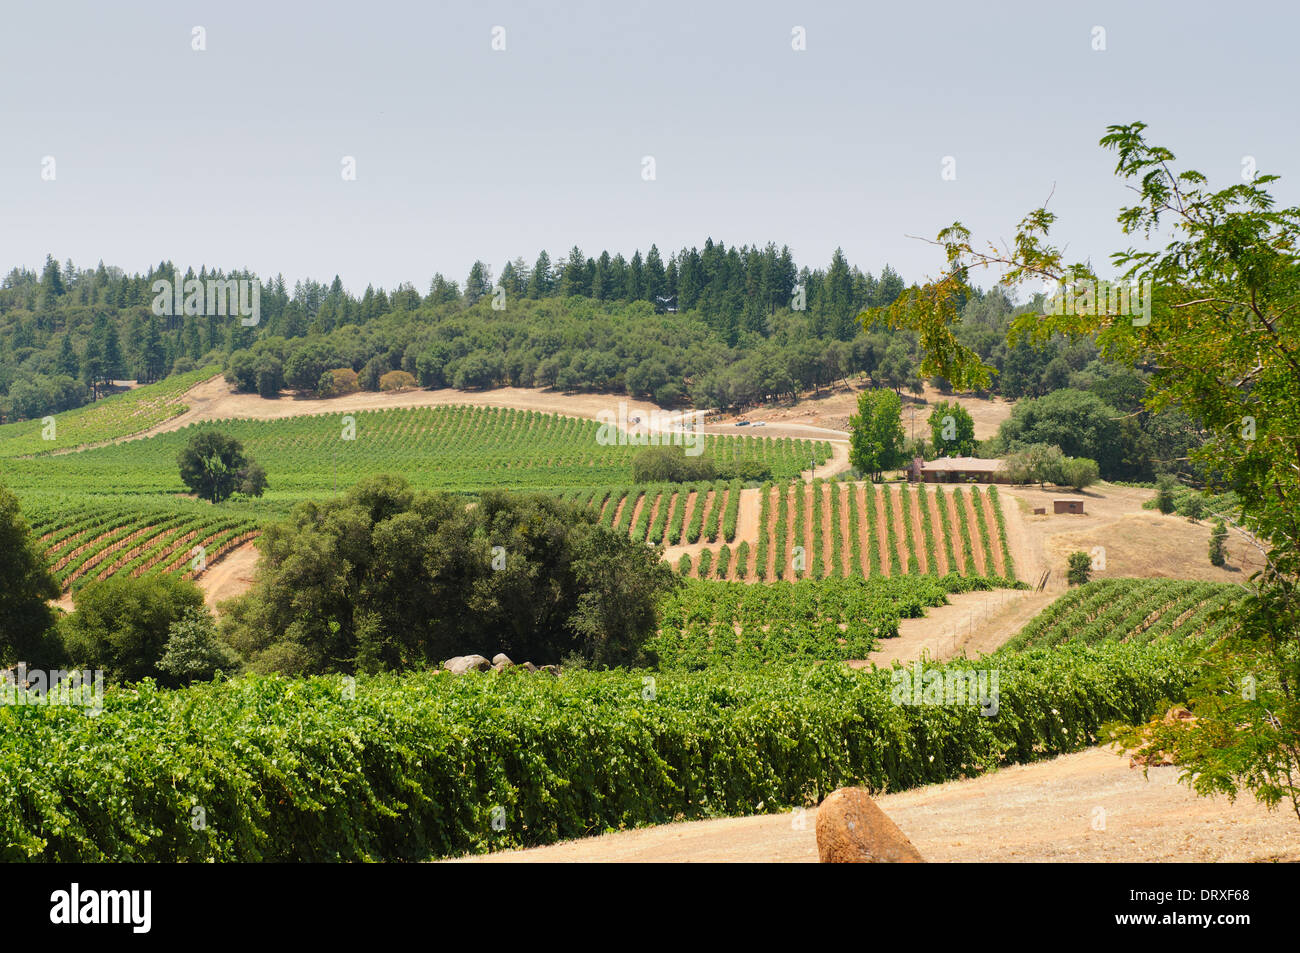 vineyard in the foothills of the Sierra Nevadas, near Plymouth and Fiddletown, California Stock Photo